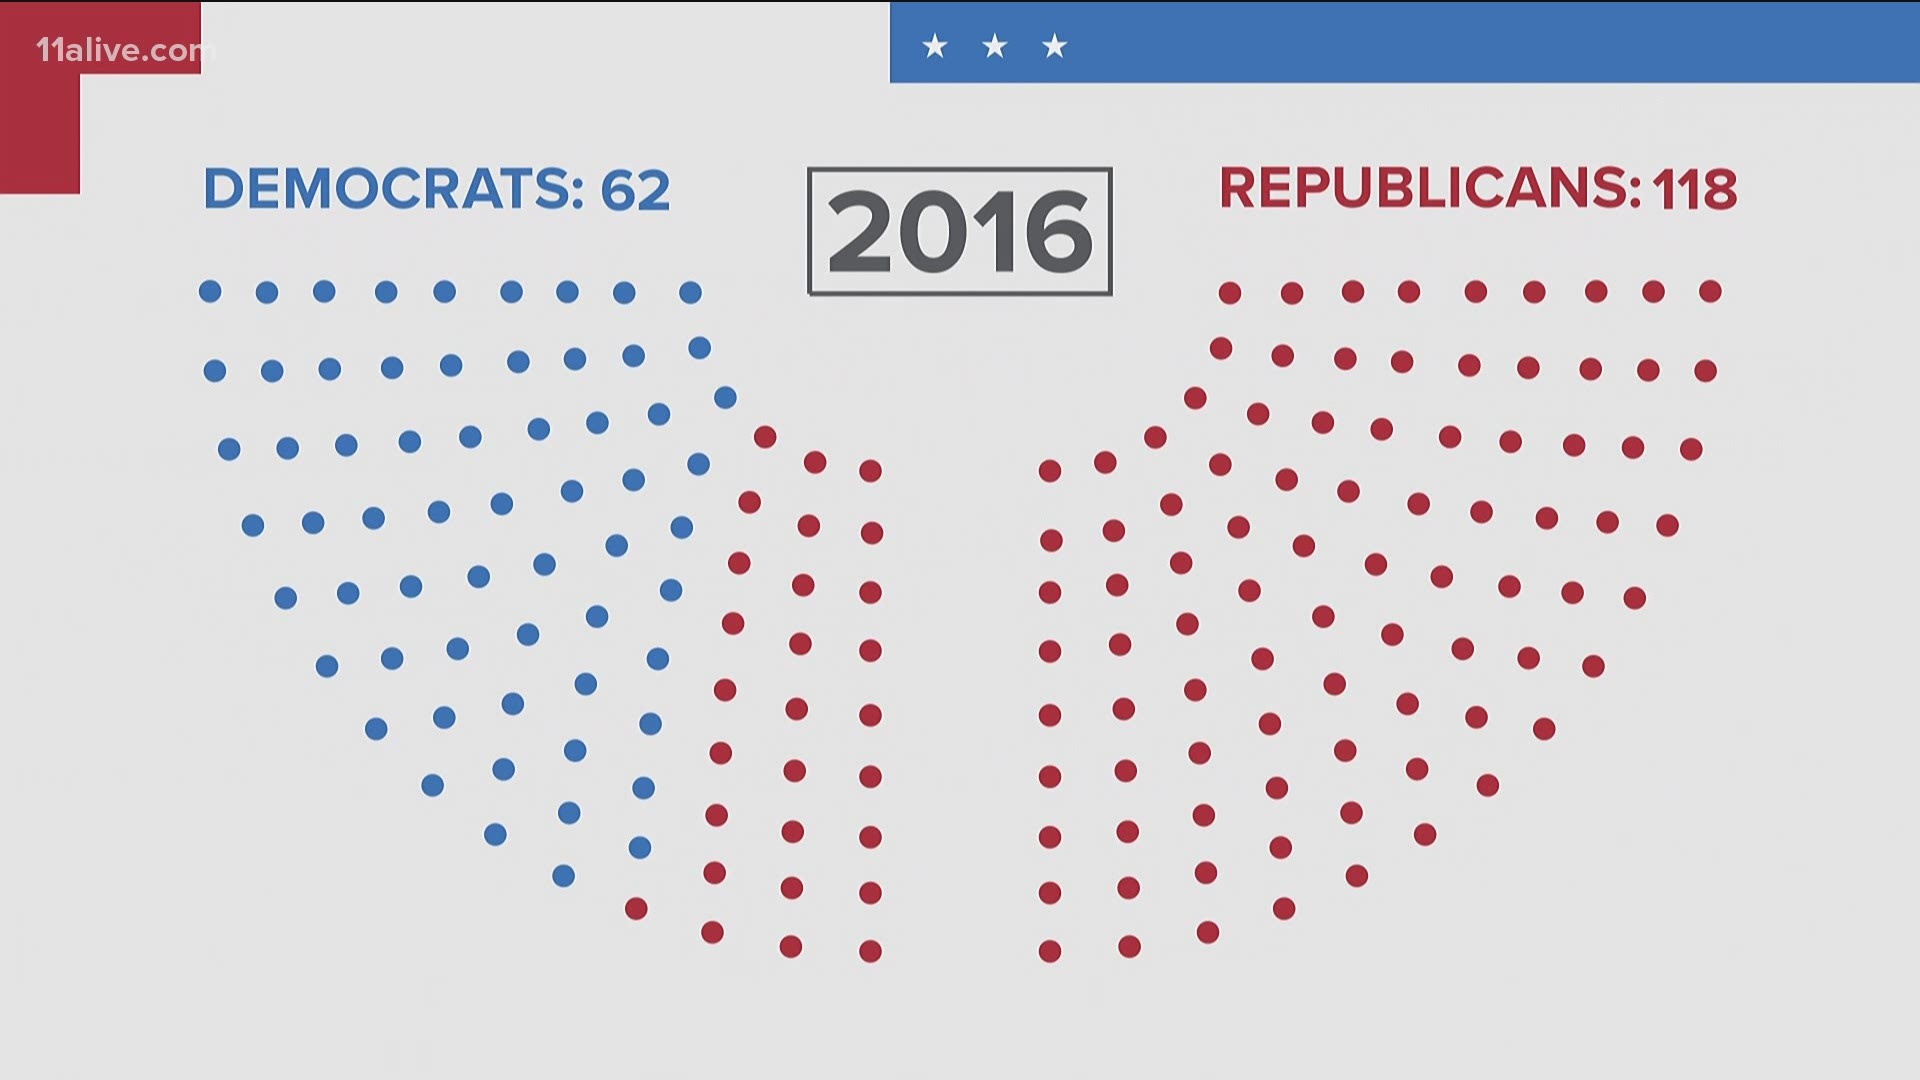 If the Democrats are able to flip 16 seats, that would undo GOP majority.